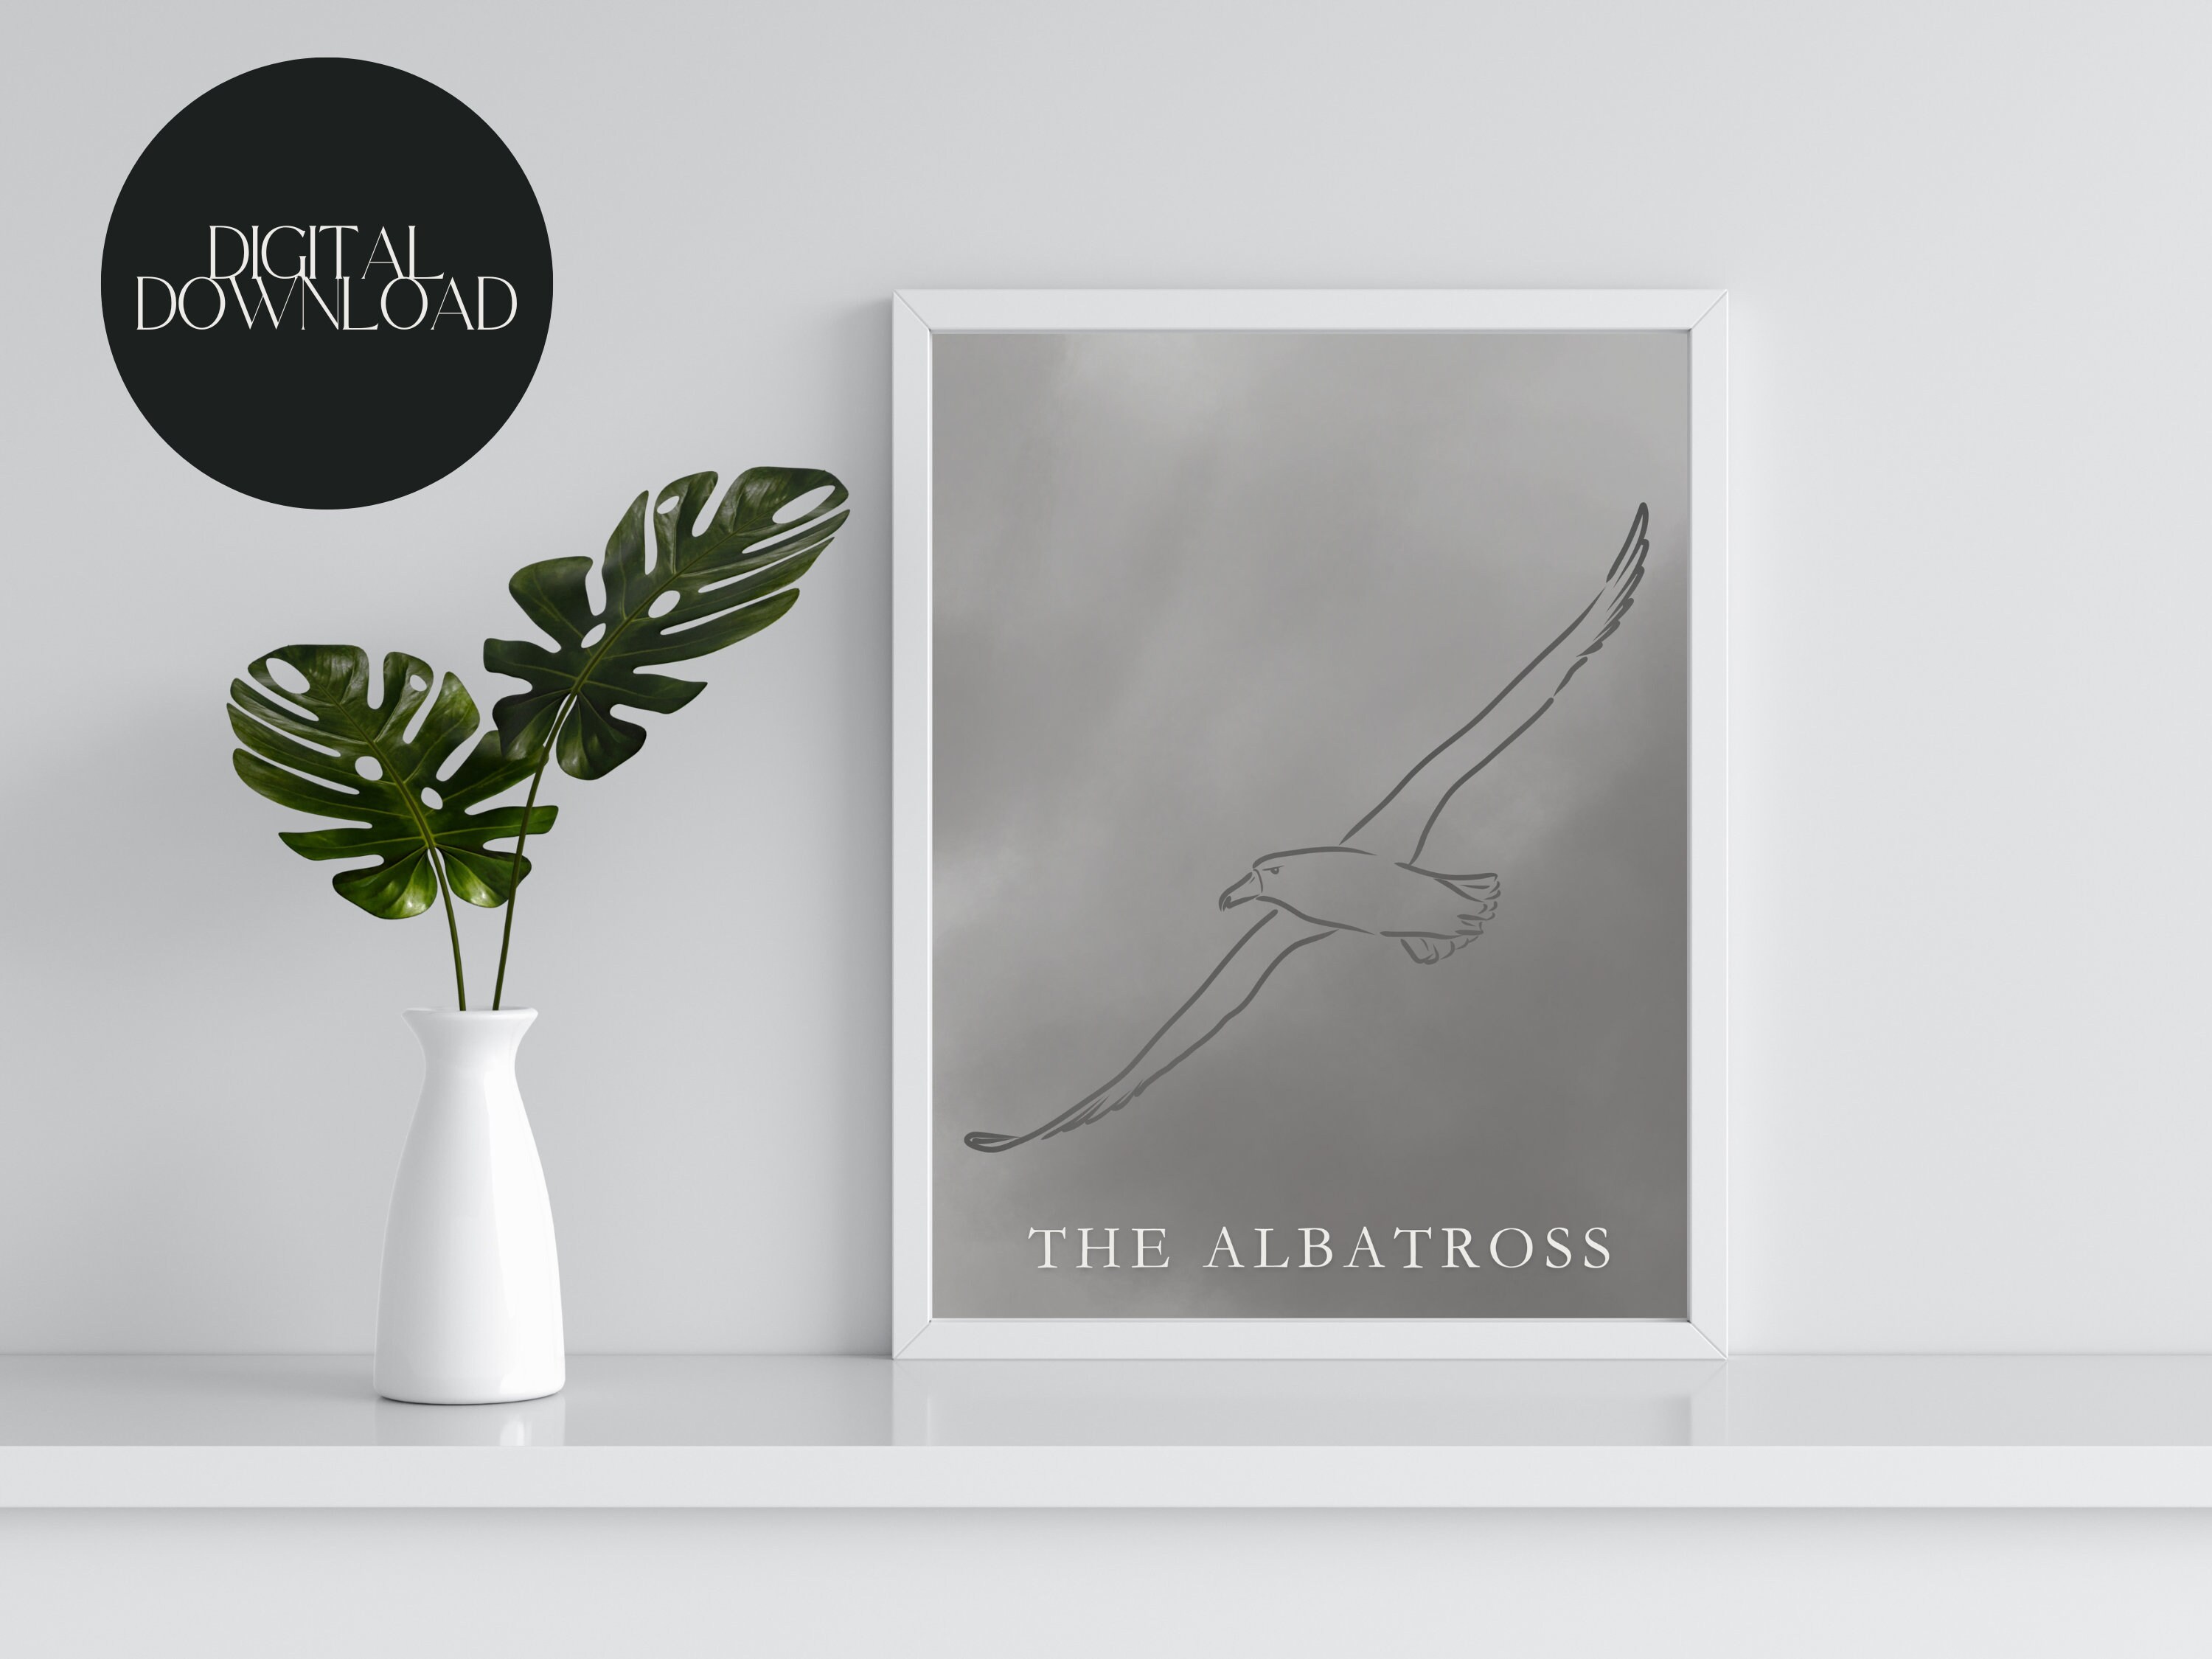 Discover The Tortured Poets Department | THE ALBATROSS | Taylor Poster | Taylor Prints